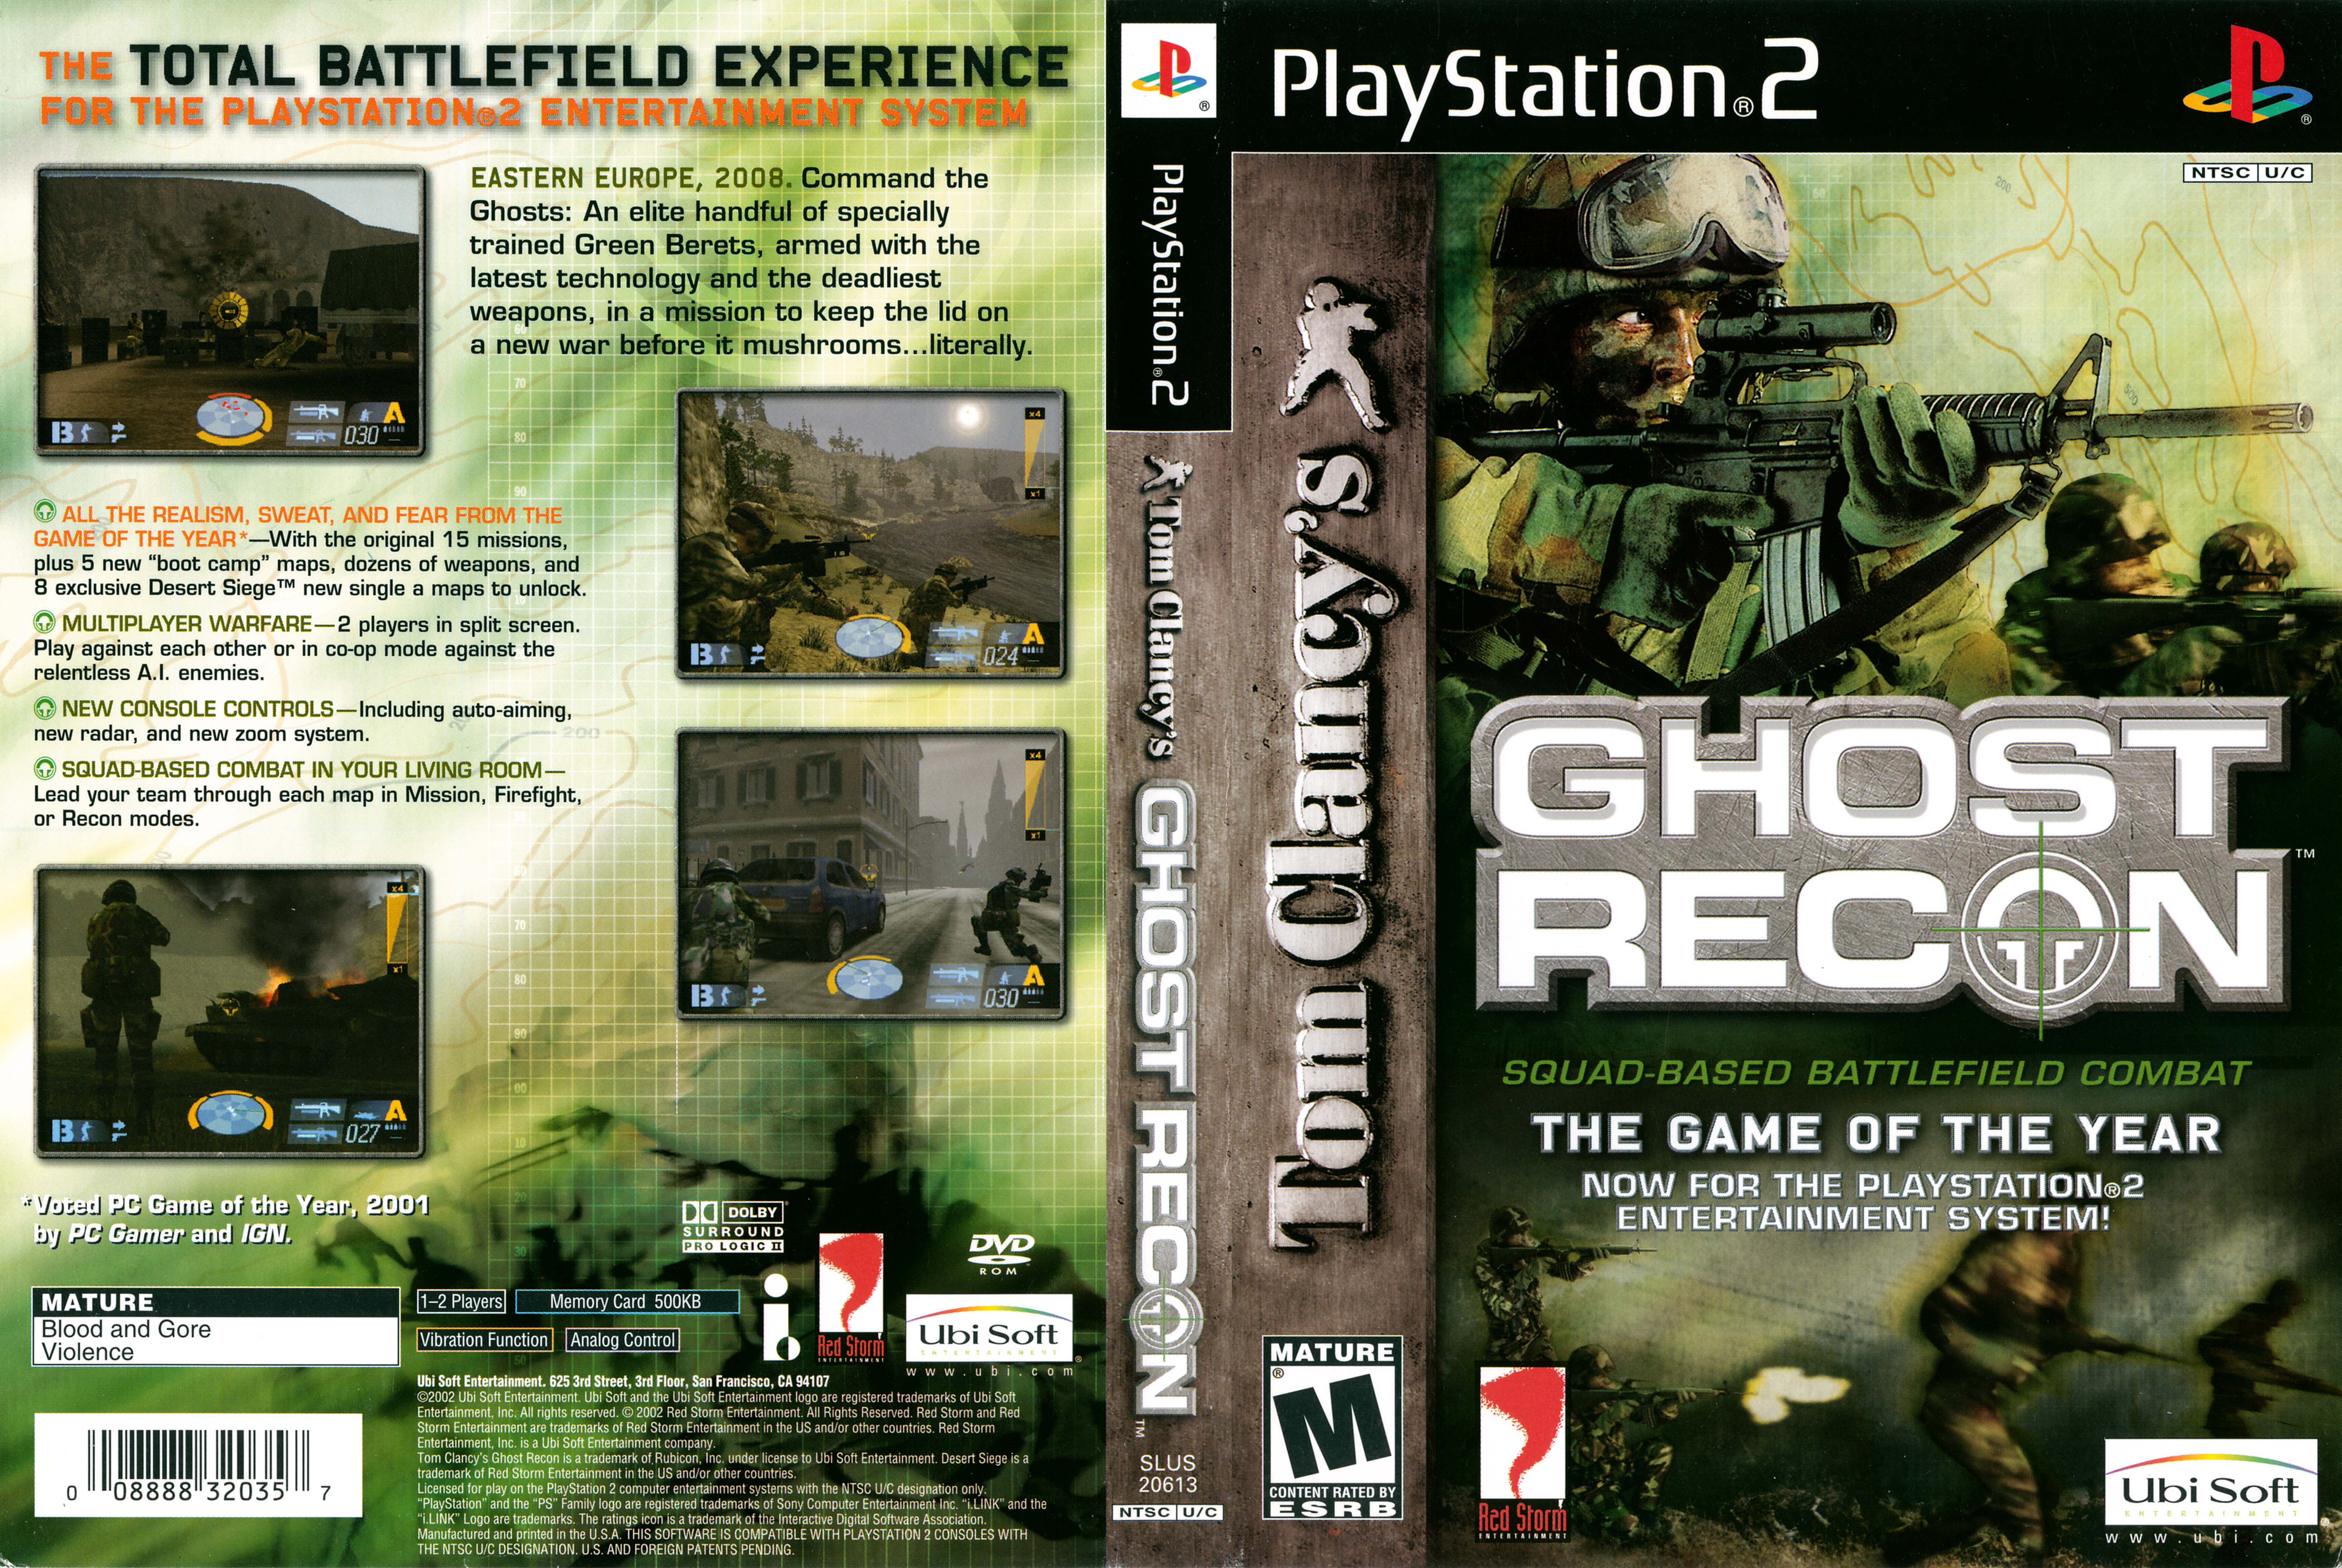 snyde Rådne asiatisk Tom Clancy's Ghost Recon [SLUS 20613] (Sony Playstation 2) - Box Scans  (1200DPI) : Ubisoft : Free Download, Borrow, and Streaming : Internet  Archive